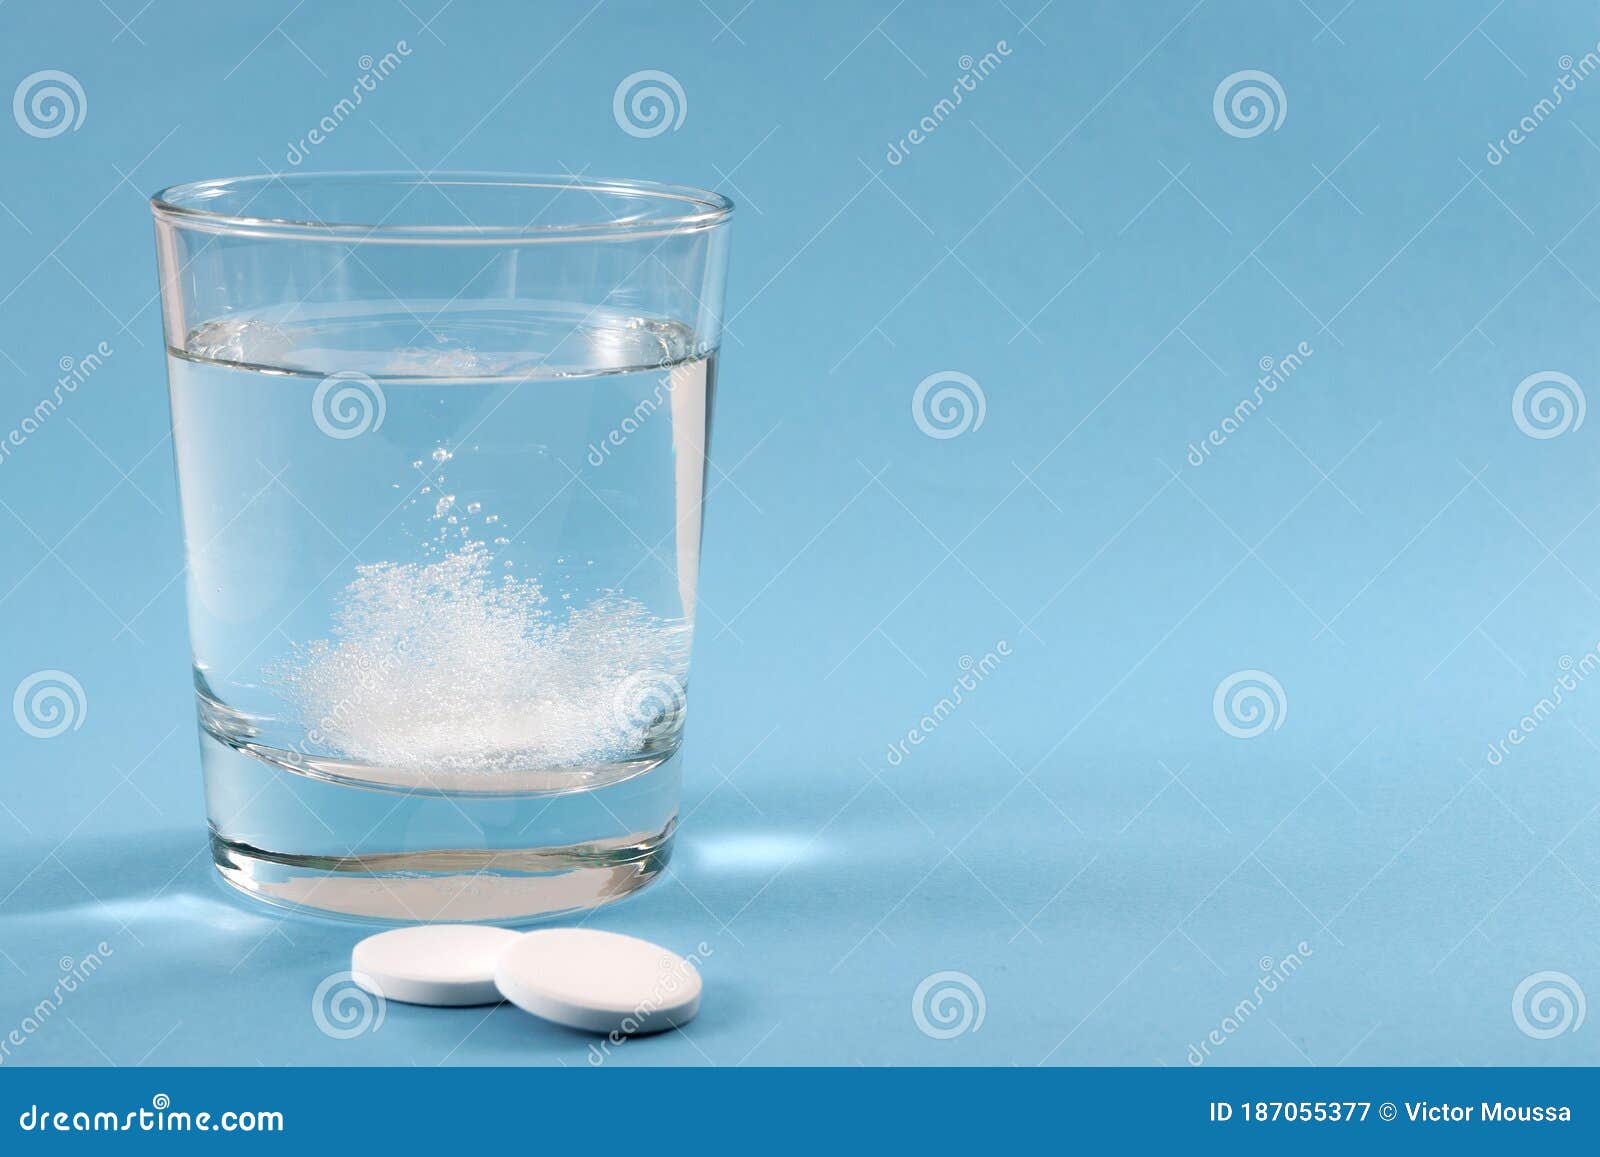 recovering from a hangover and nursing a headache with aspirin concept with effervescent drink tablet dissolving in water with two